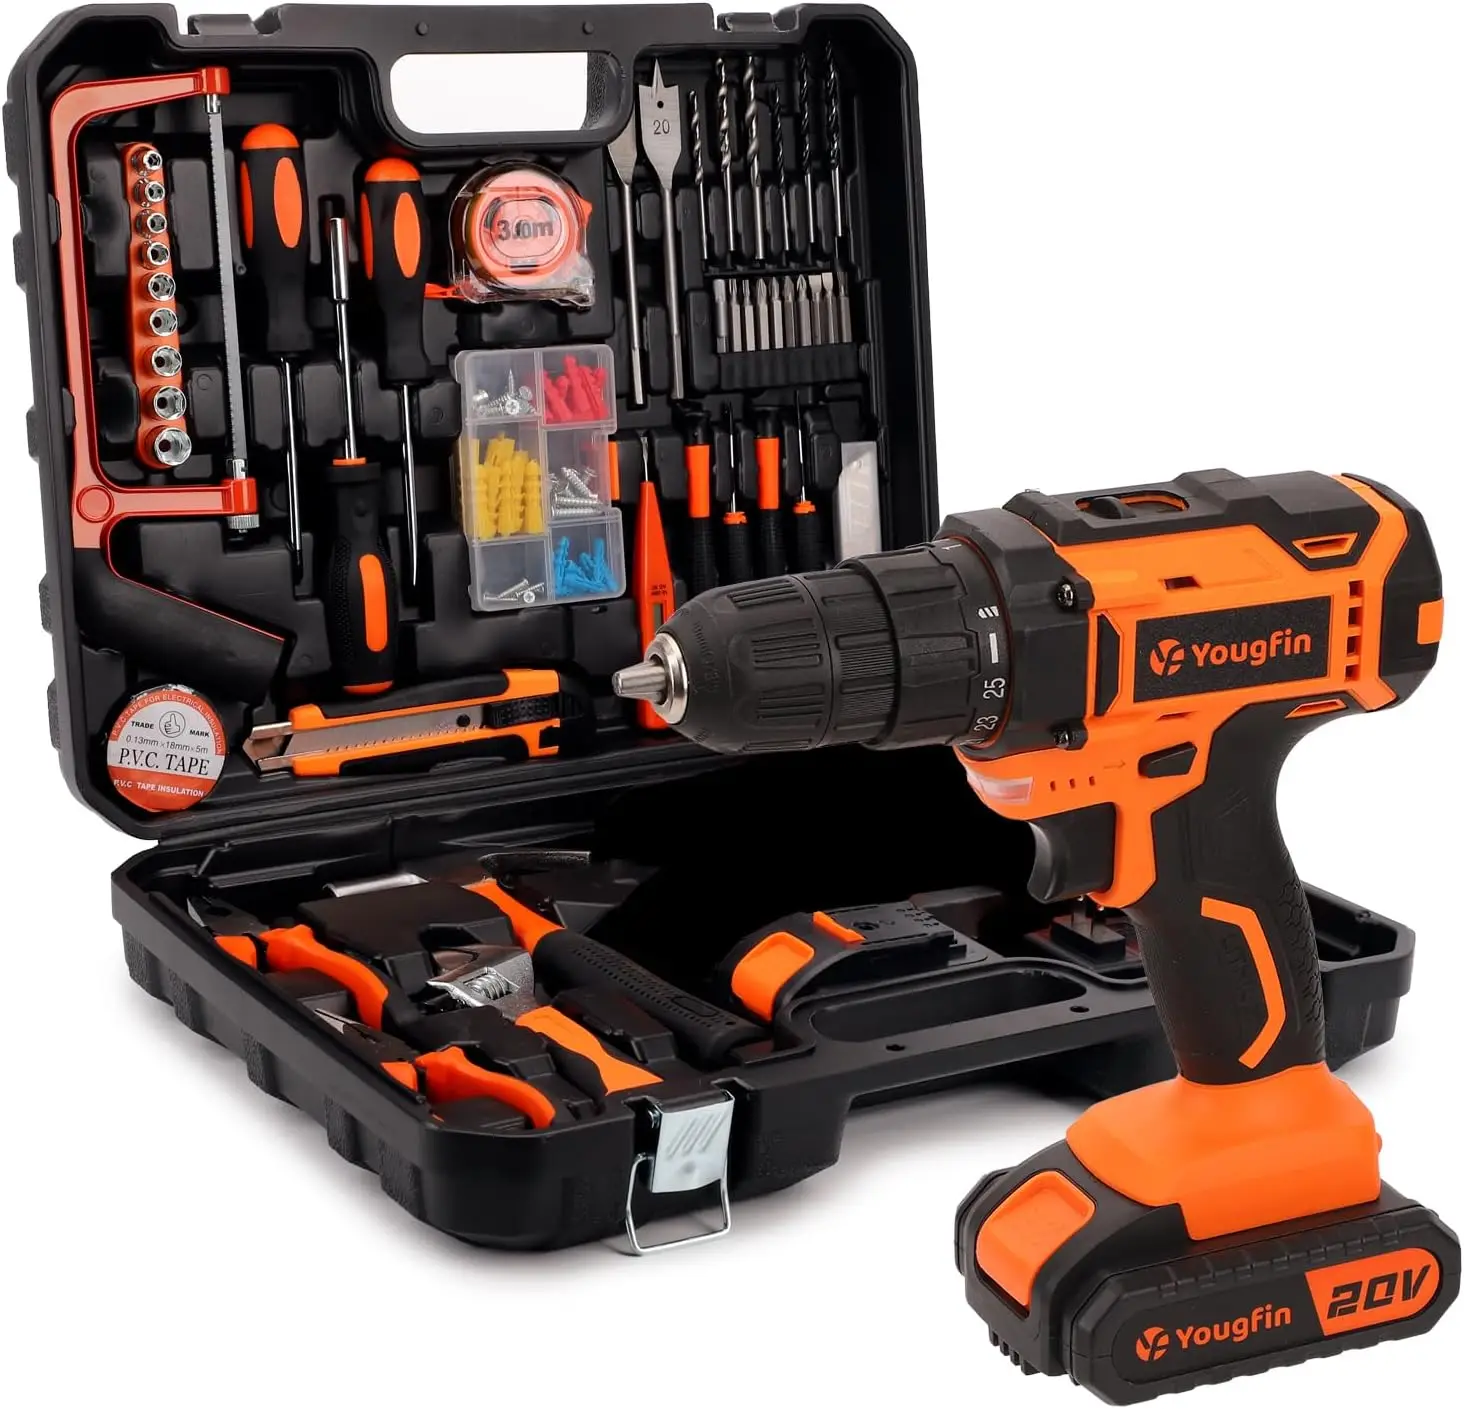 Yougfin 118 Pcs Power Tool Combo Kits with 20V Cordless Drill (3/8